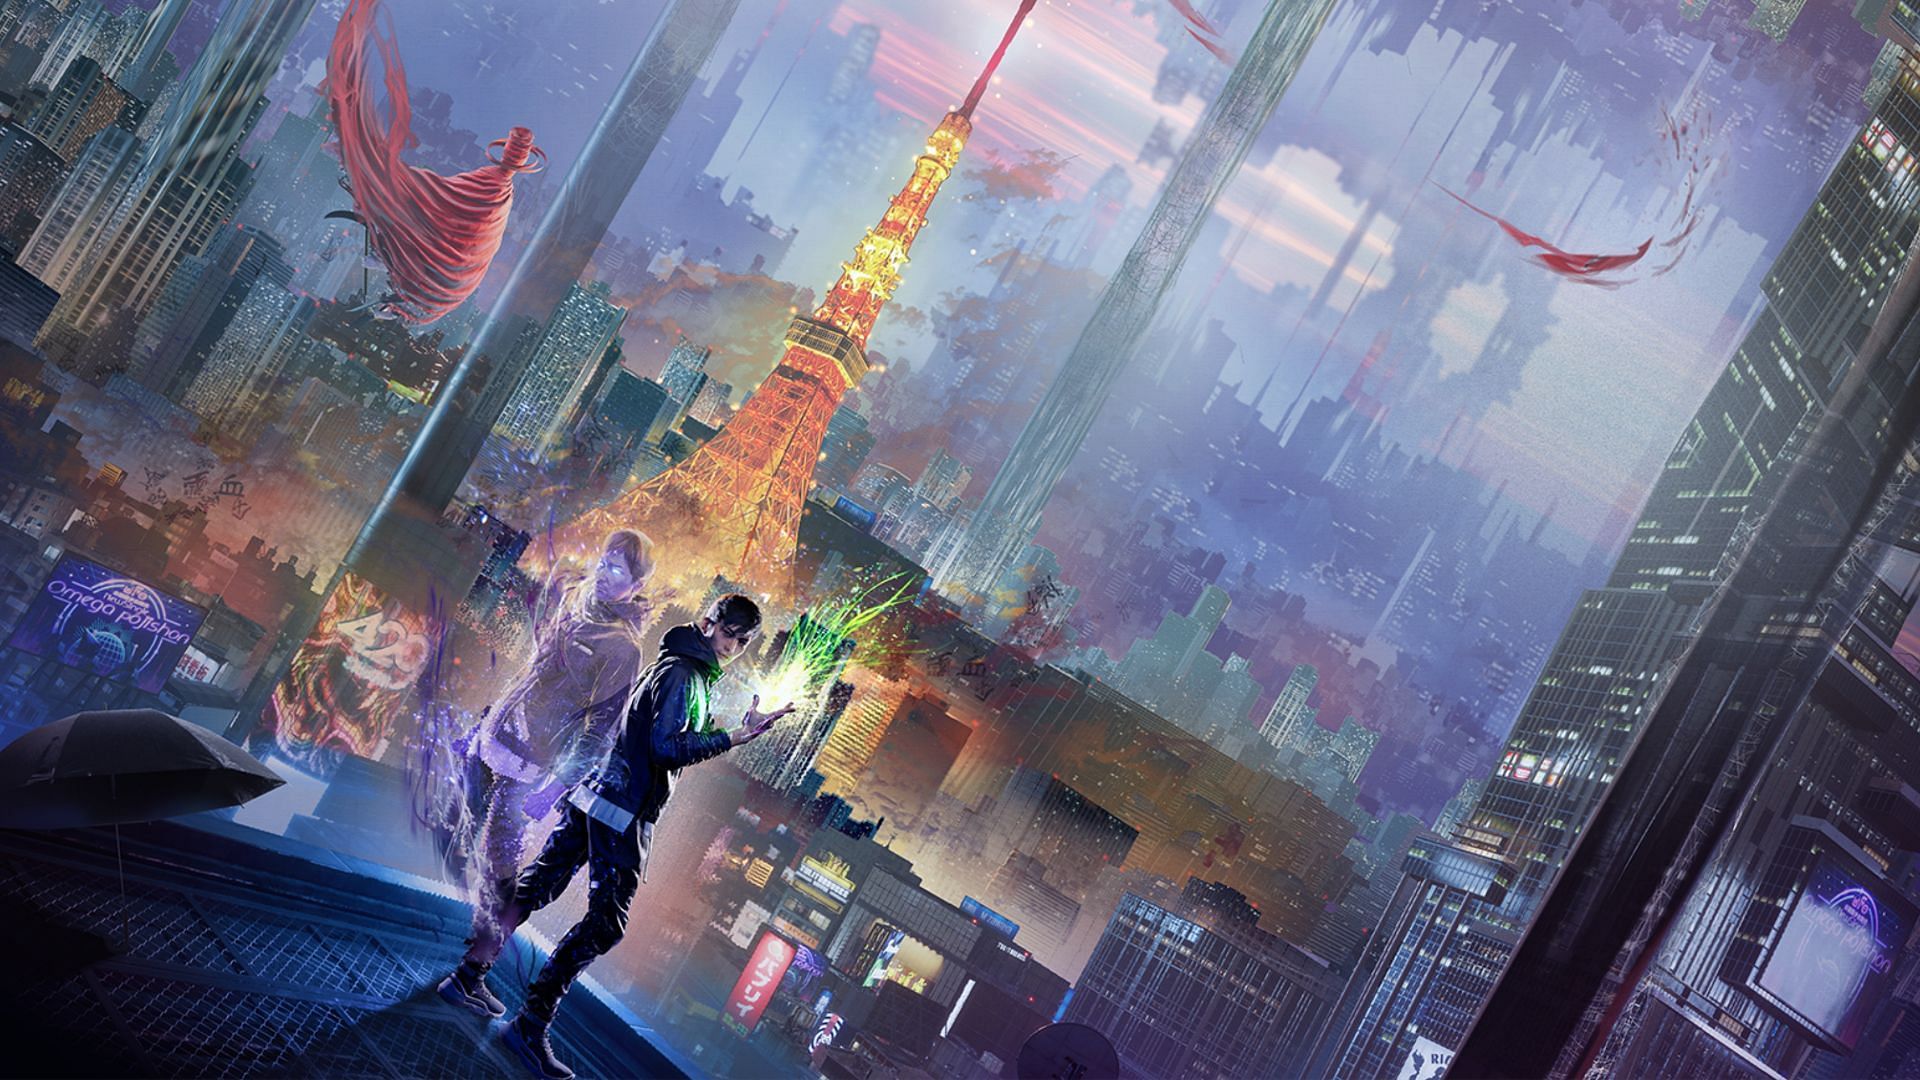 Ghostwire: Tokyo is coming to Xbox and Xbox Game Pass along with a brand new title update (Image via Bethesda, Tango Gameworks)